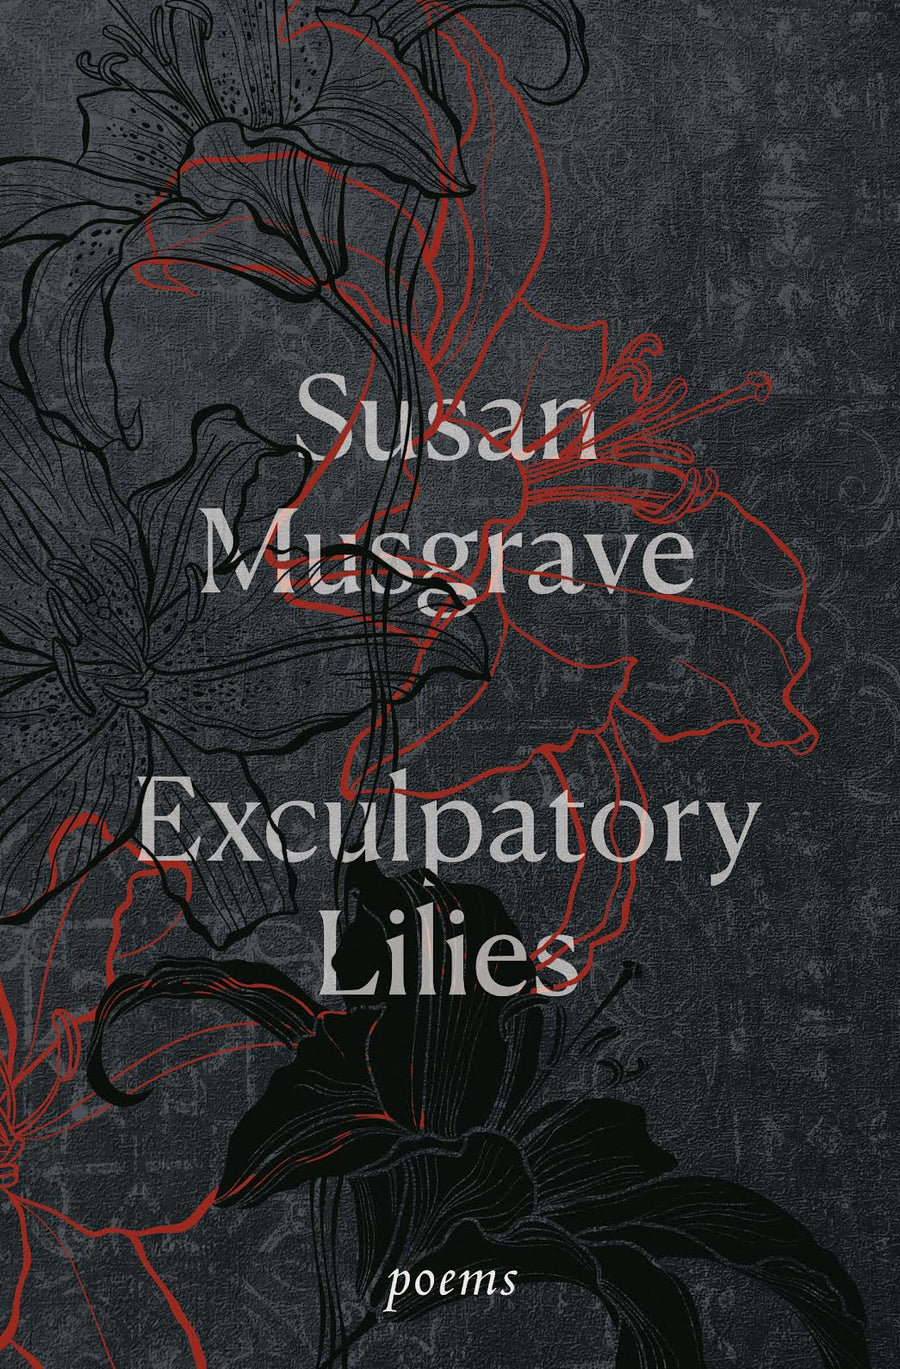 EXCULPATORY LILIES/poetry